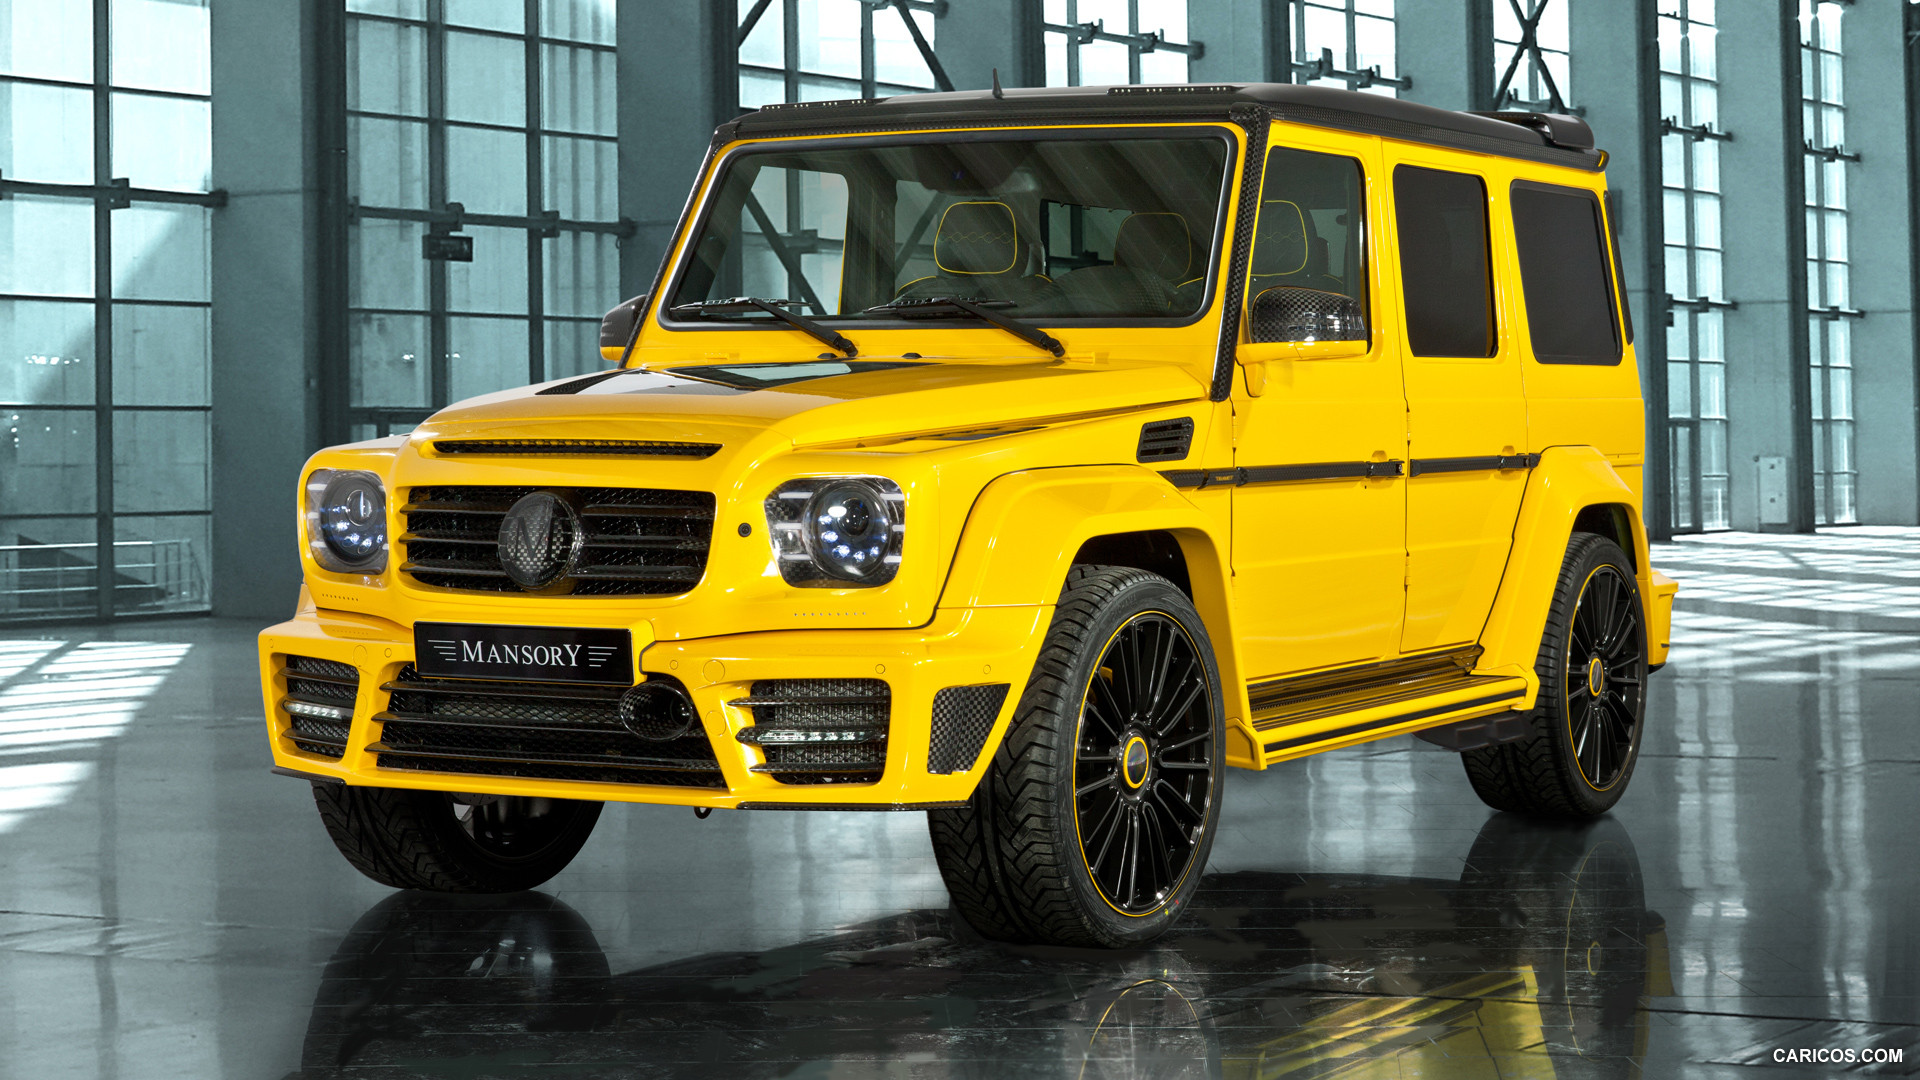 2013 Mansory Gronos based on Mercedes-Benz G-Class AMG  - Front, #1 of 7